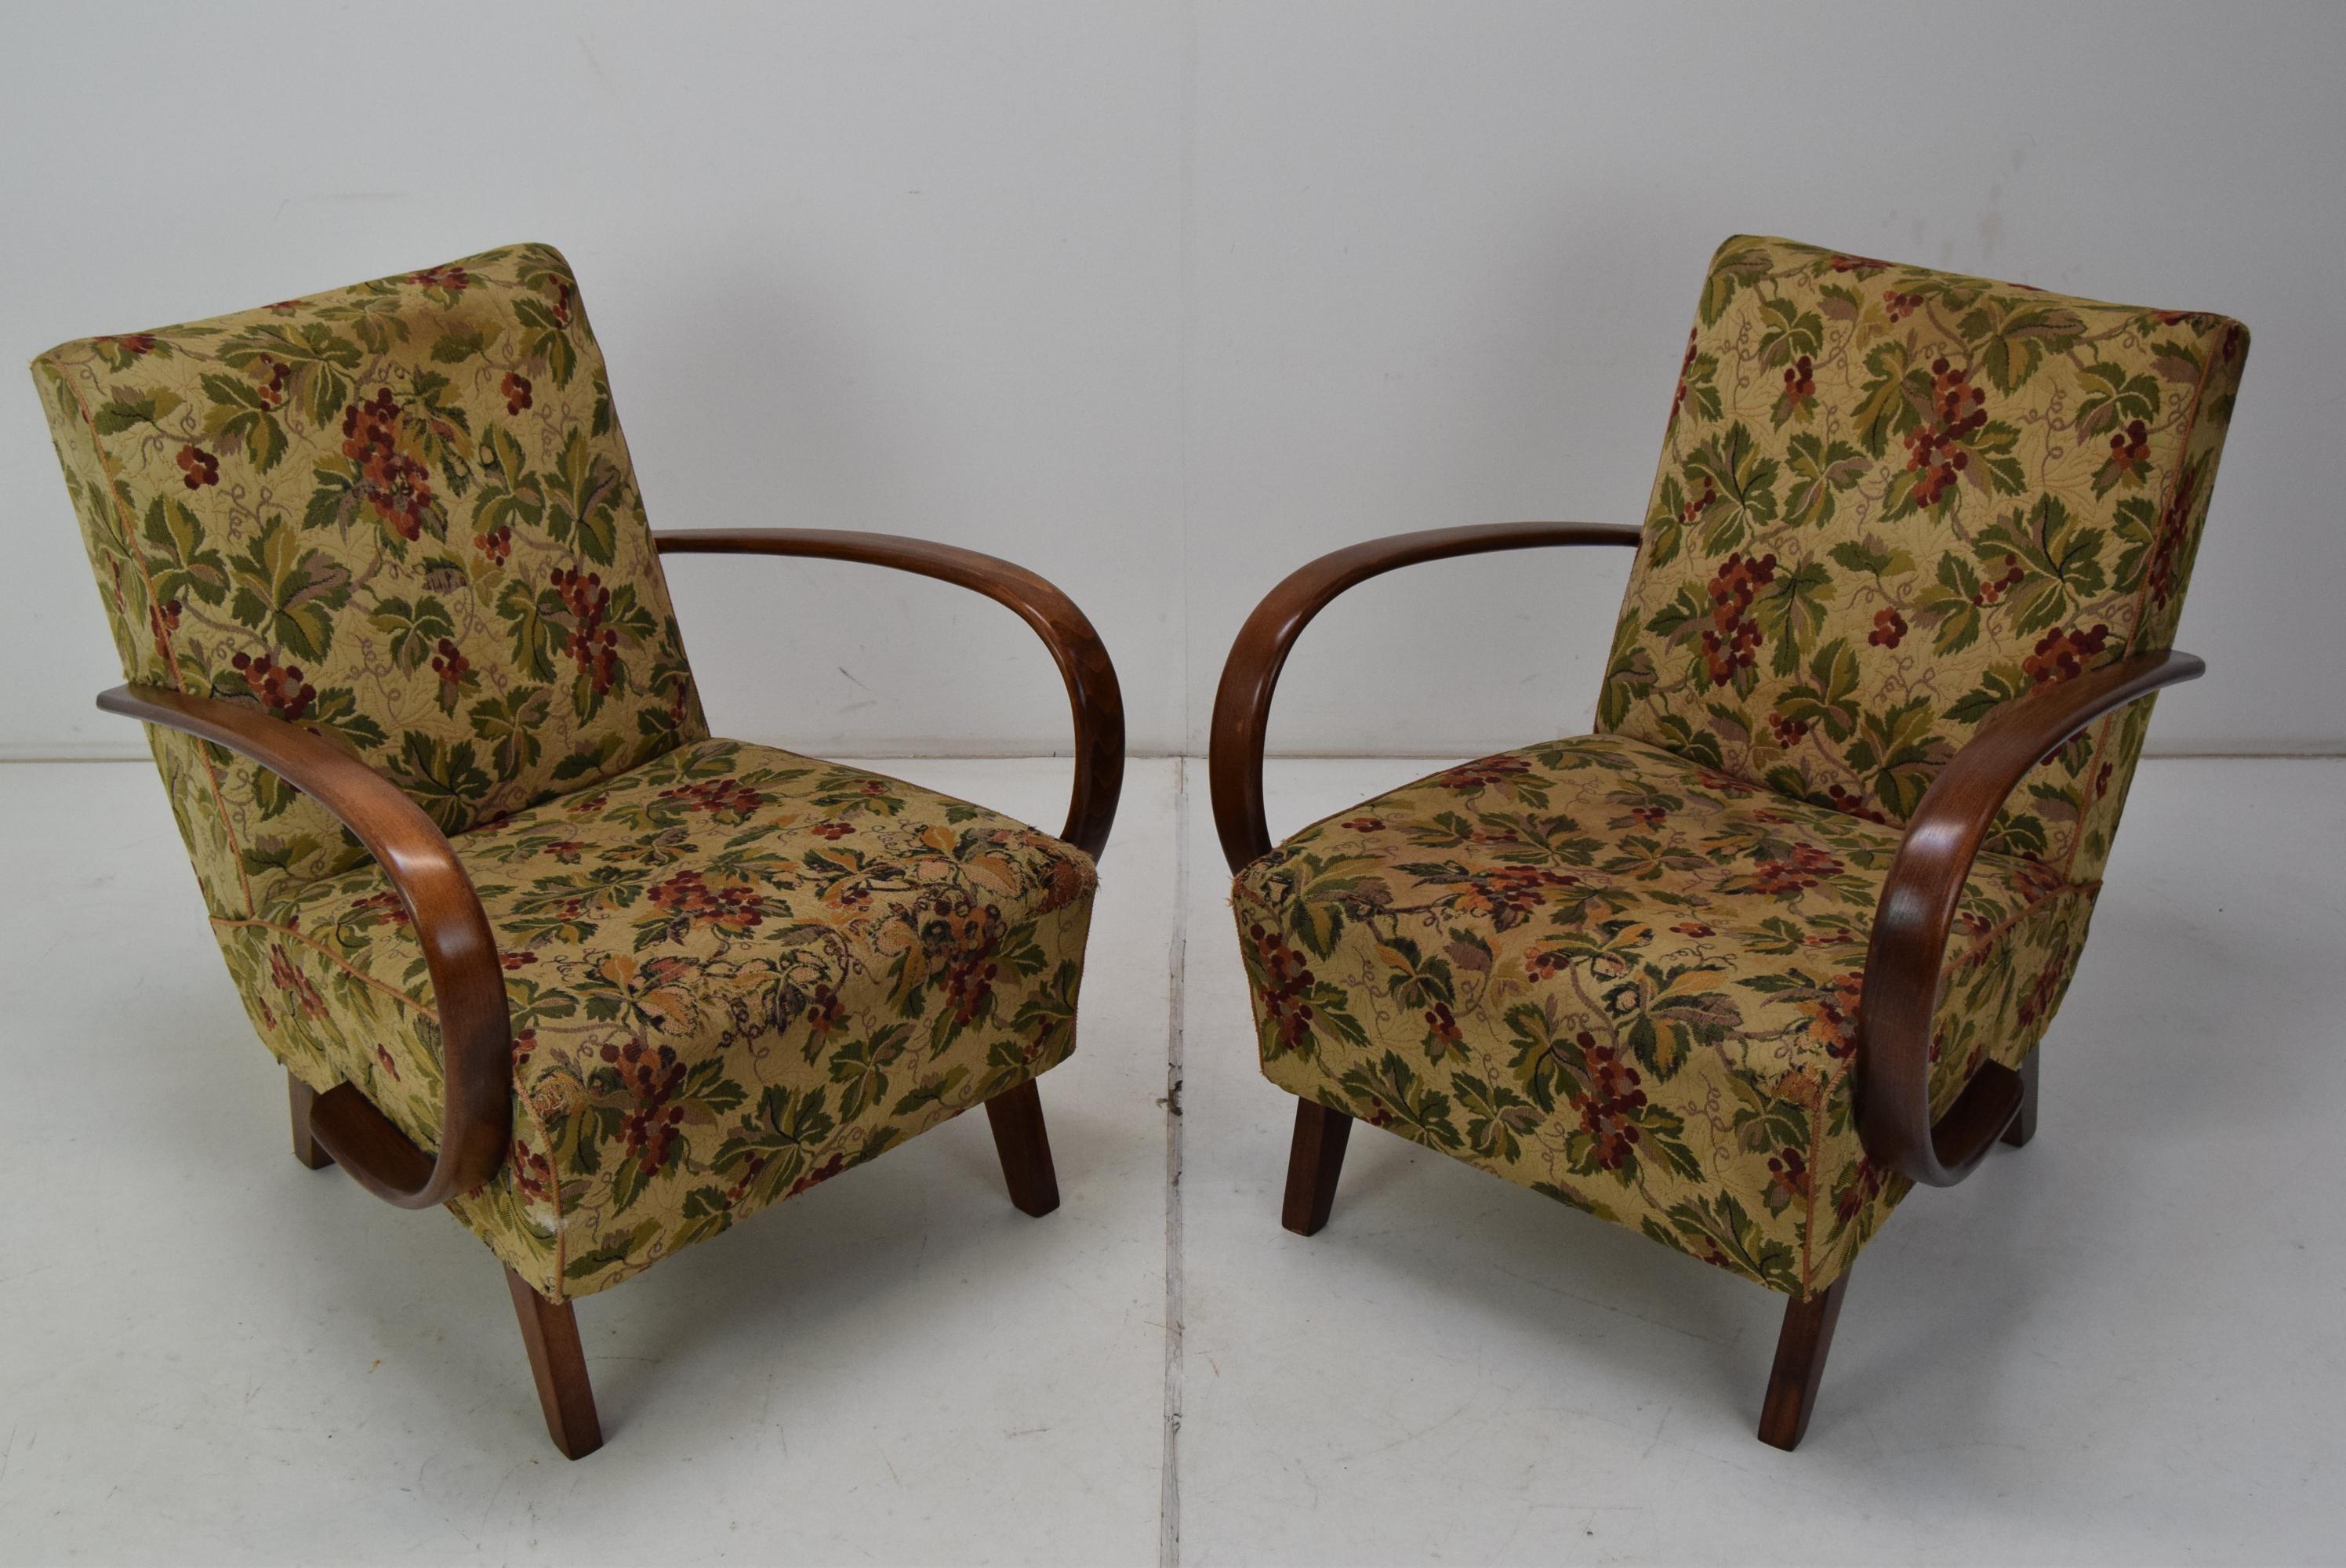 
Made in Czechoslovakia
Made of Fabric,Beech Wood
The armchairs are suitable for reupholstering
The wooden parts were restored
Height Seating 41cm
You can buy one piece
Original condition
